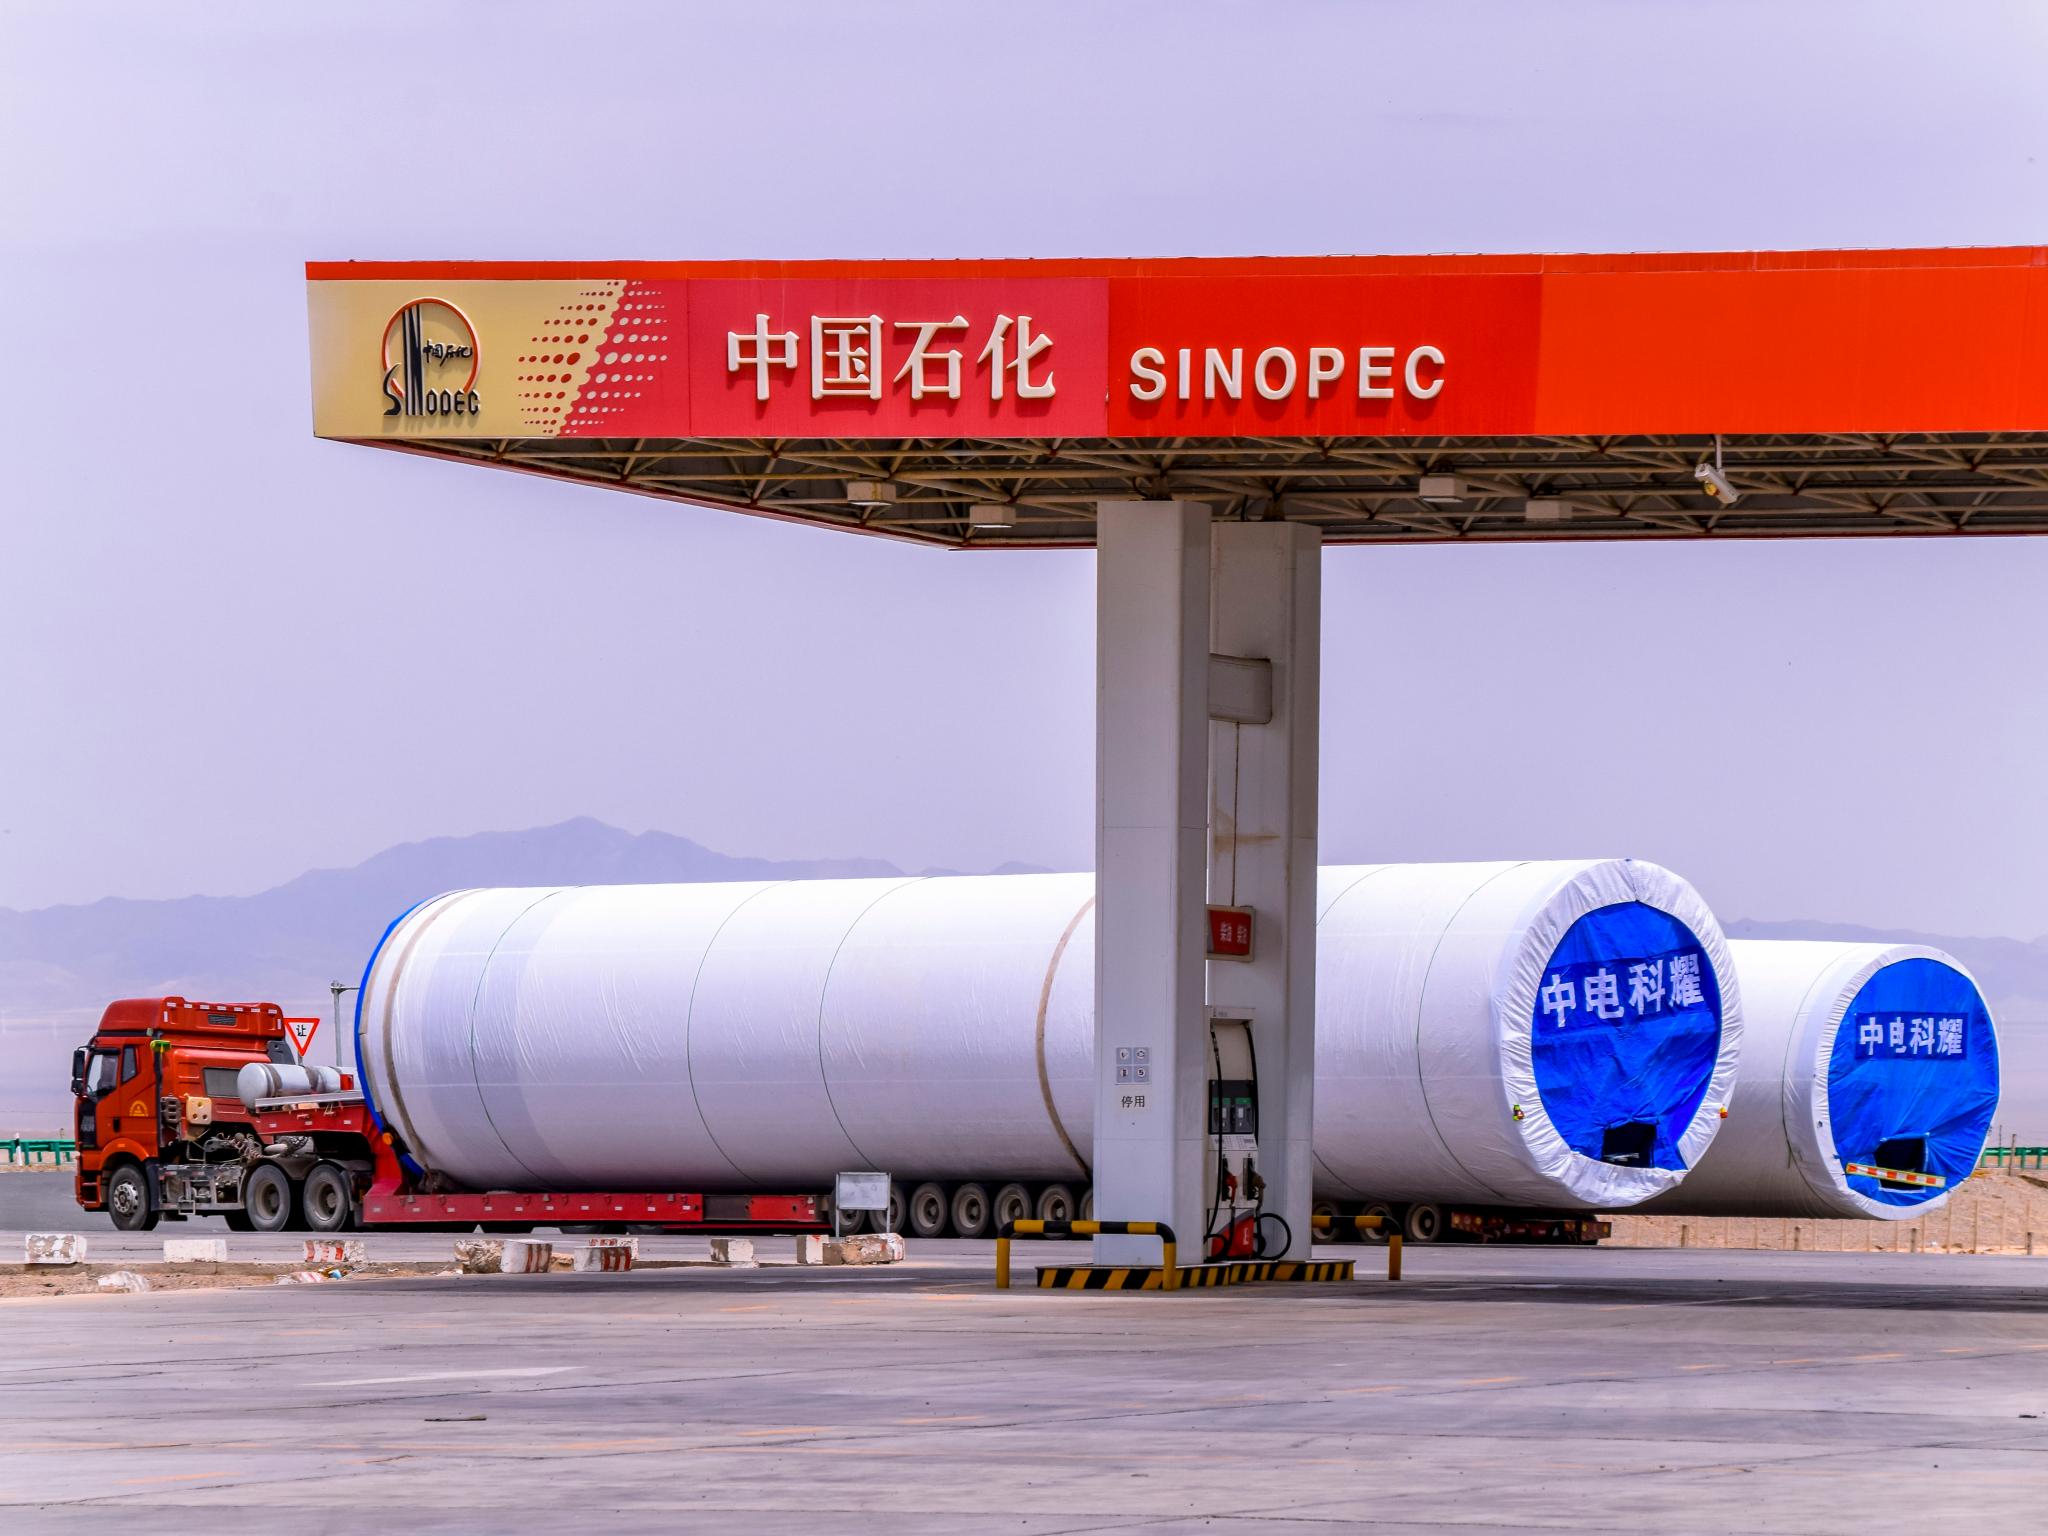  chinese-energy-giant-sinopecs-interim-profit-surges-10-on-higher-crude-prices-heres-its-h2-outlook 